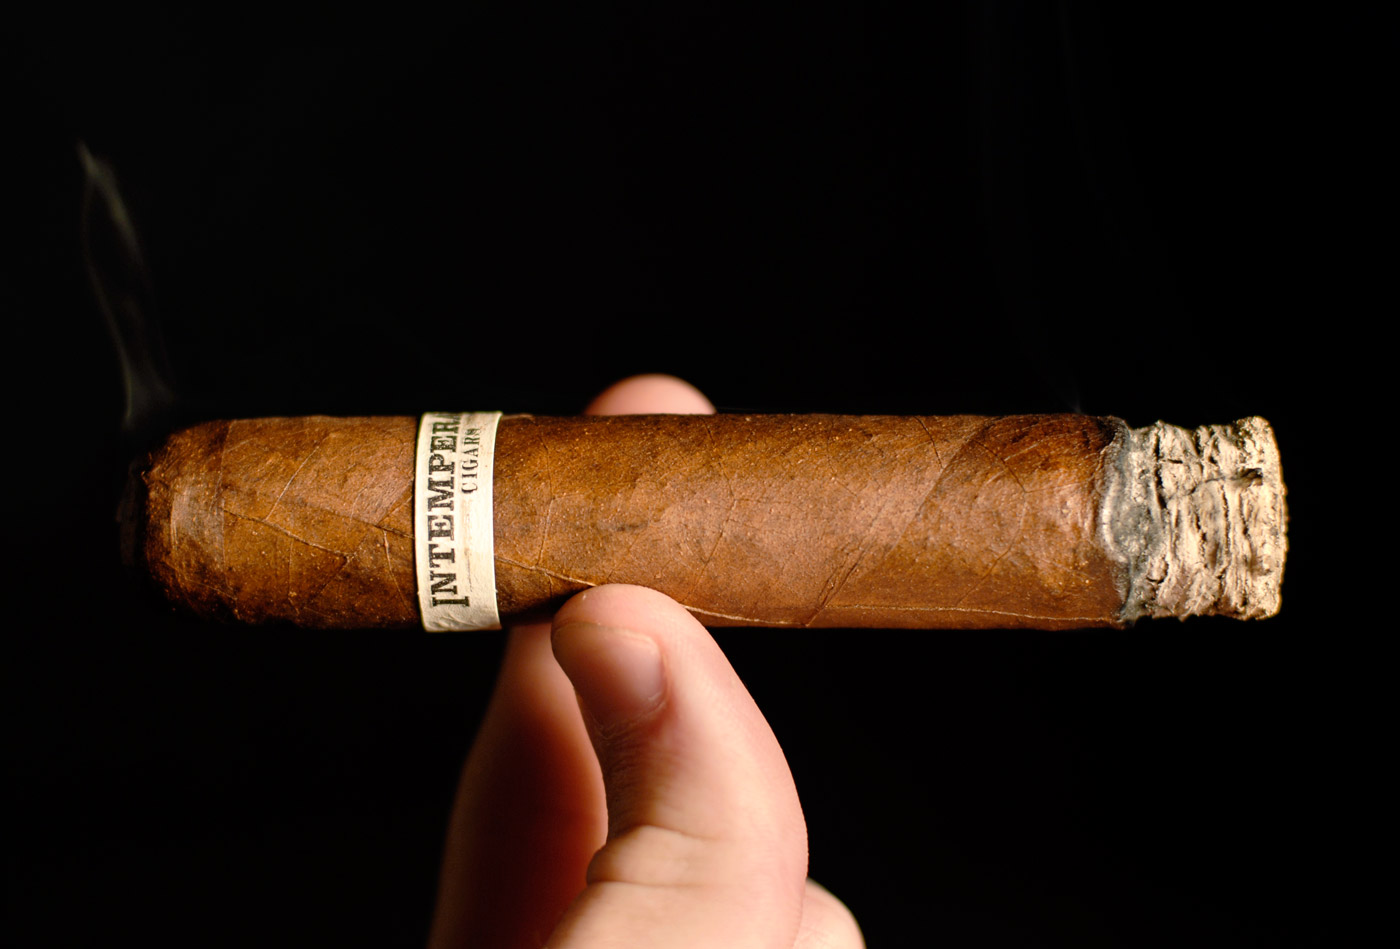 RoMa Craft Intemperence BA XXI - The Breach of Peace cigar review